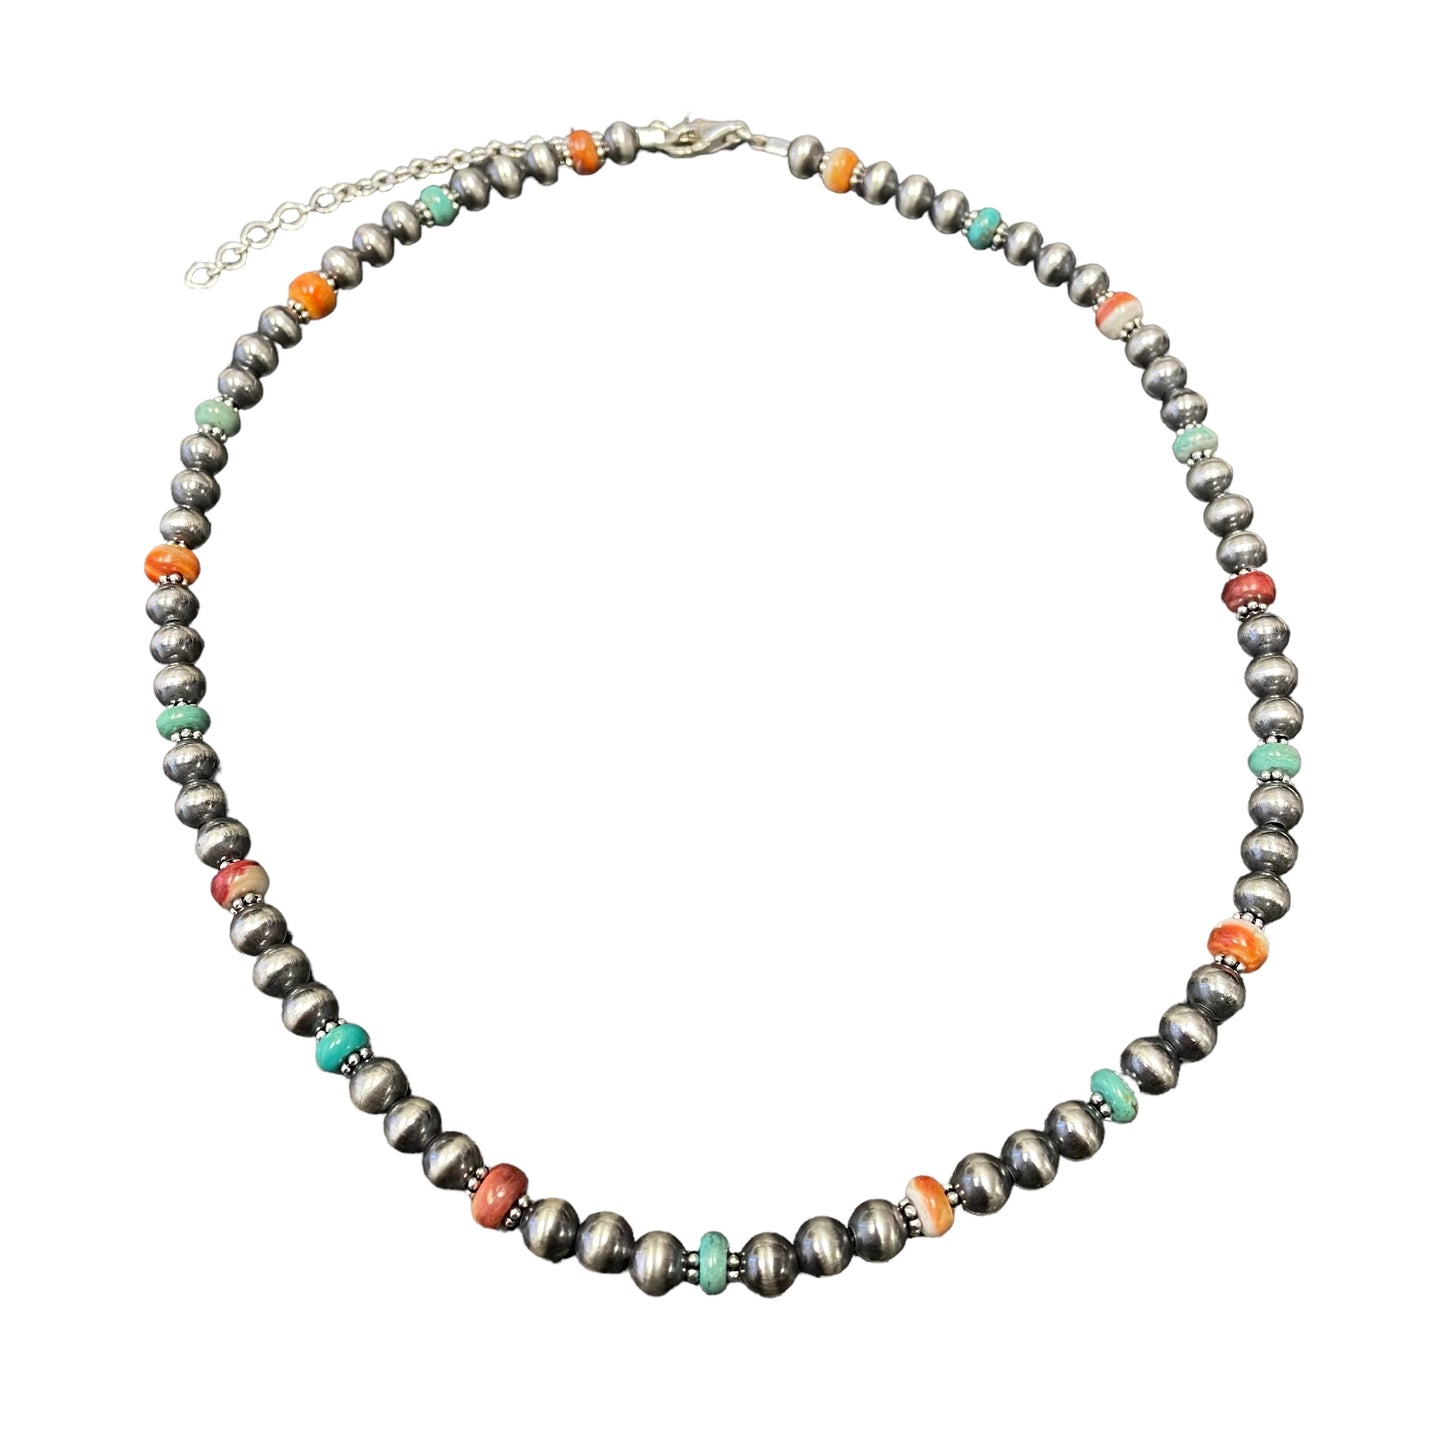 Turquoise & Spiny Oyster Desert Pearl Bead Necklace Sterling Silver